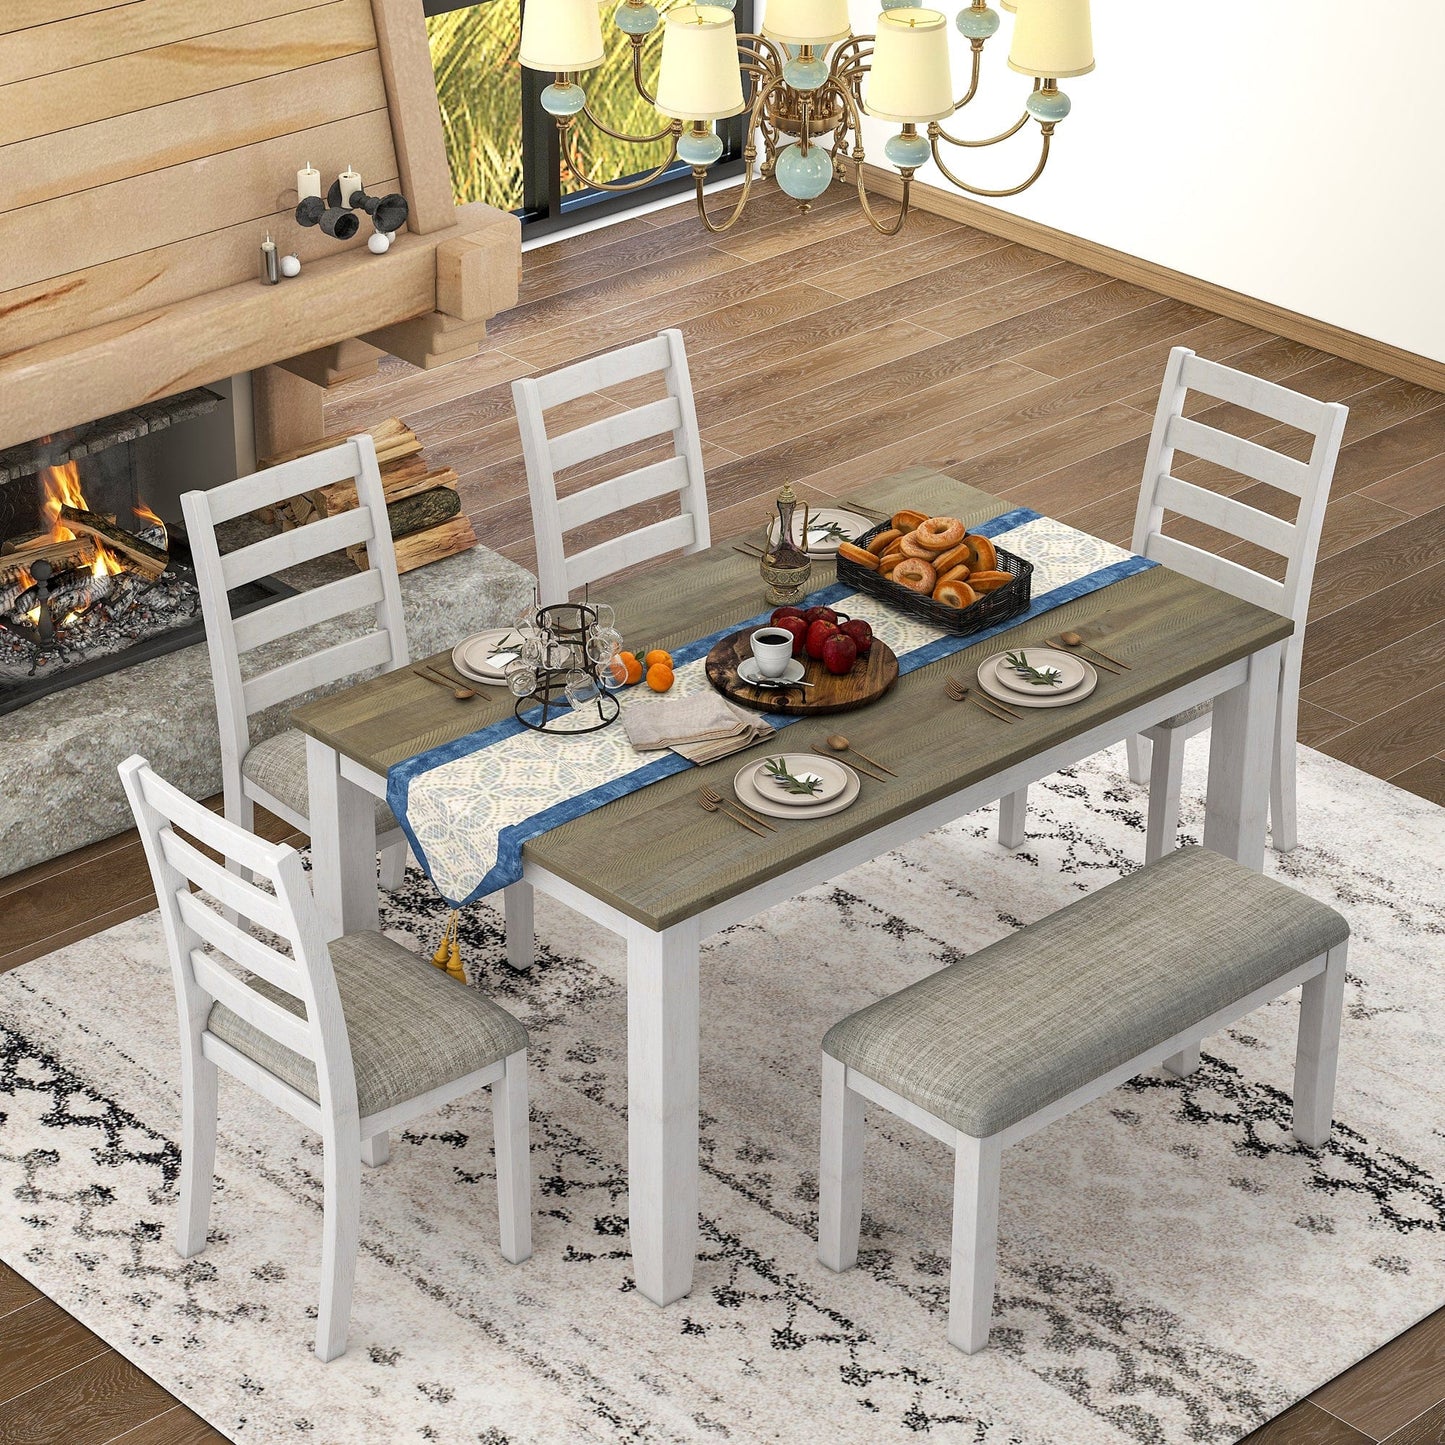 1st Choice Furniture Direct 1st Choice Modern Rustic Style 6-Piece Dining Room Table Set